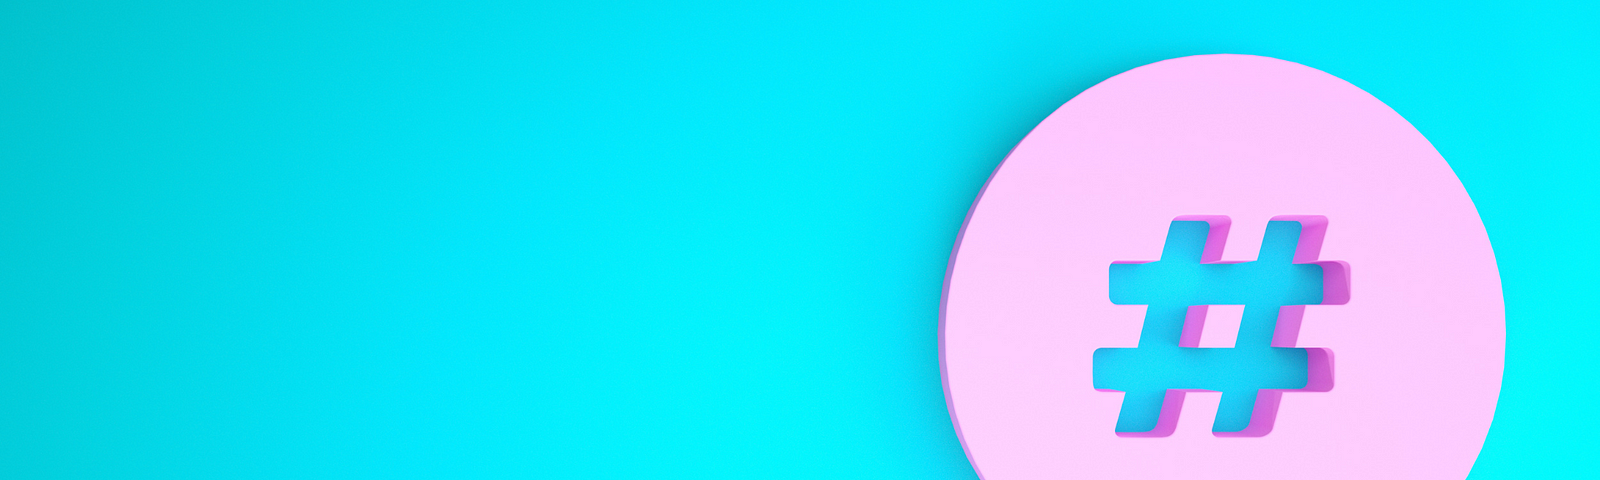 bright blue background with a pink talk bubble and a hashtag in the center